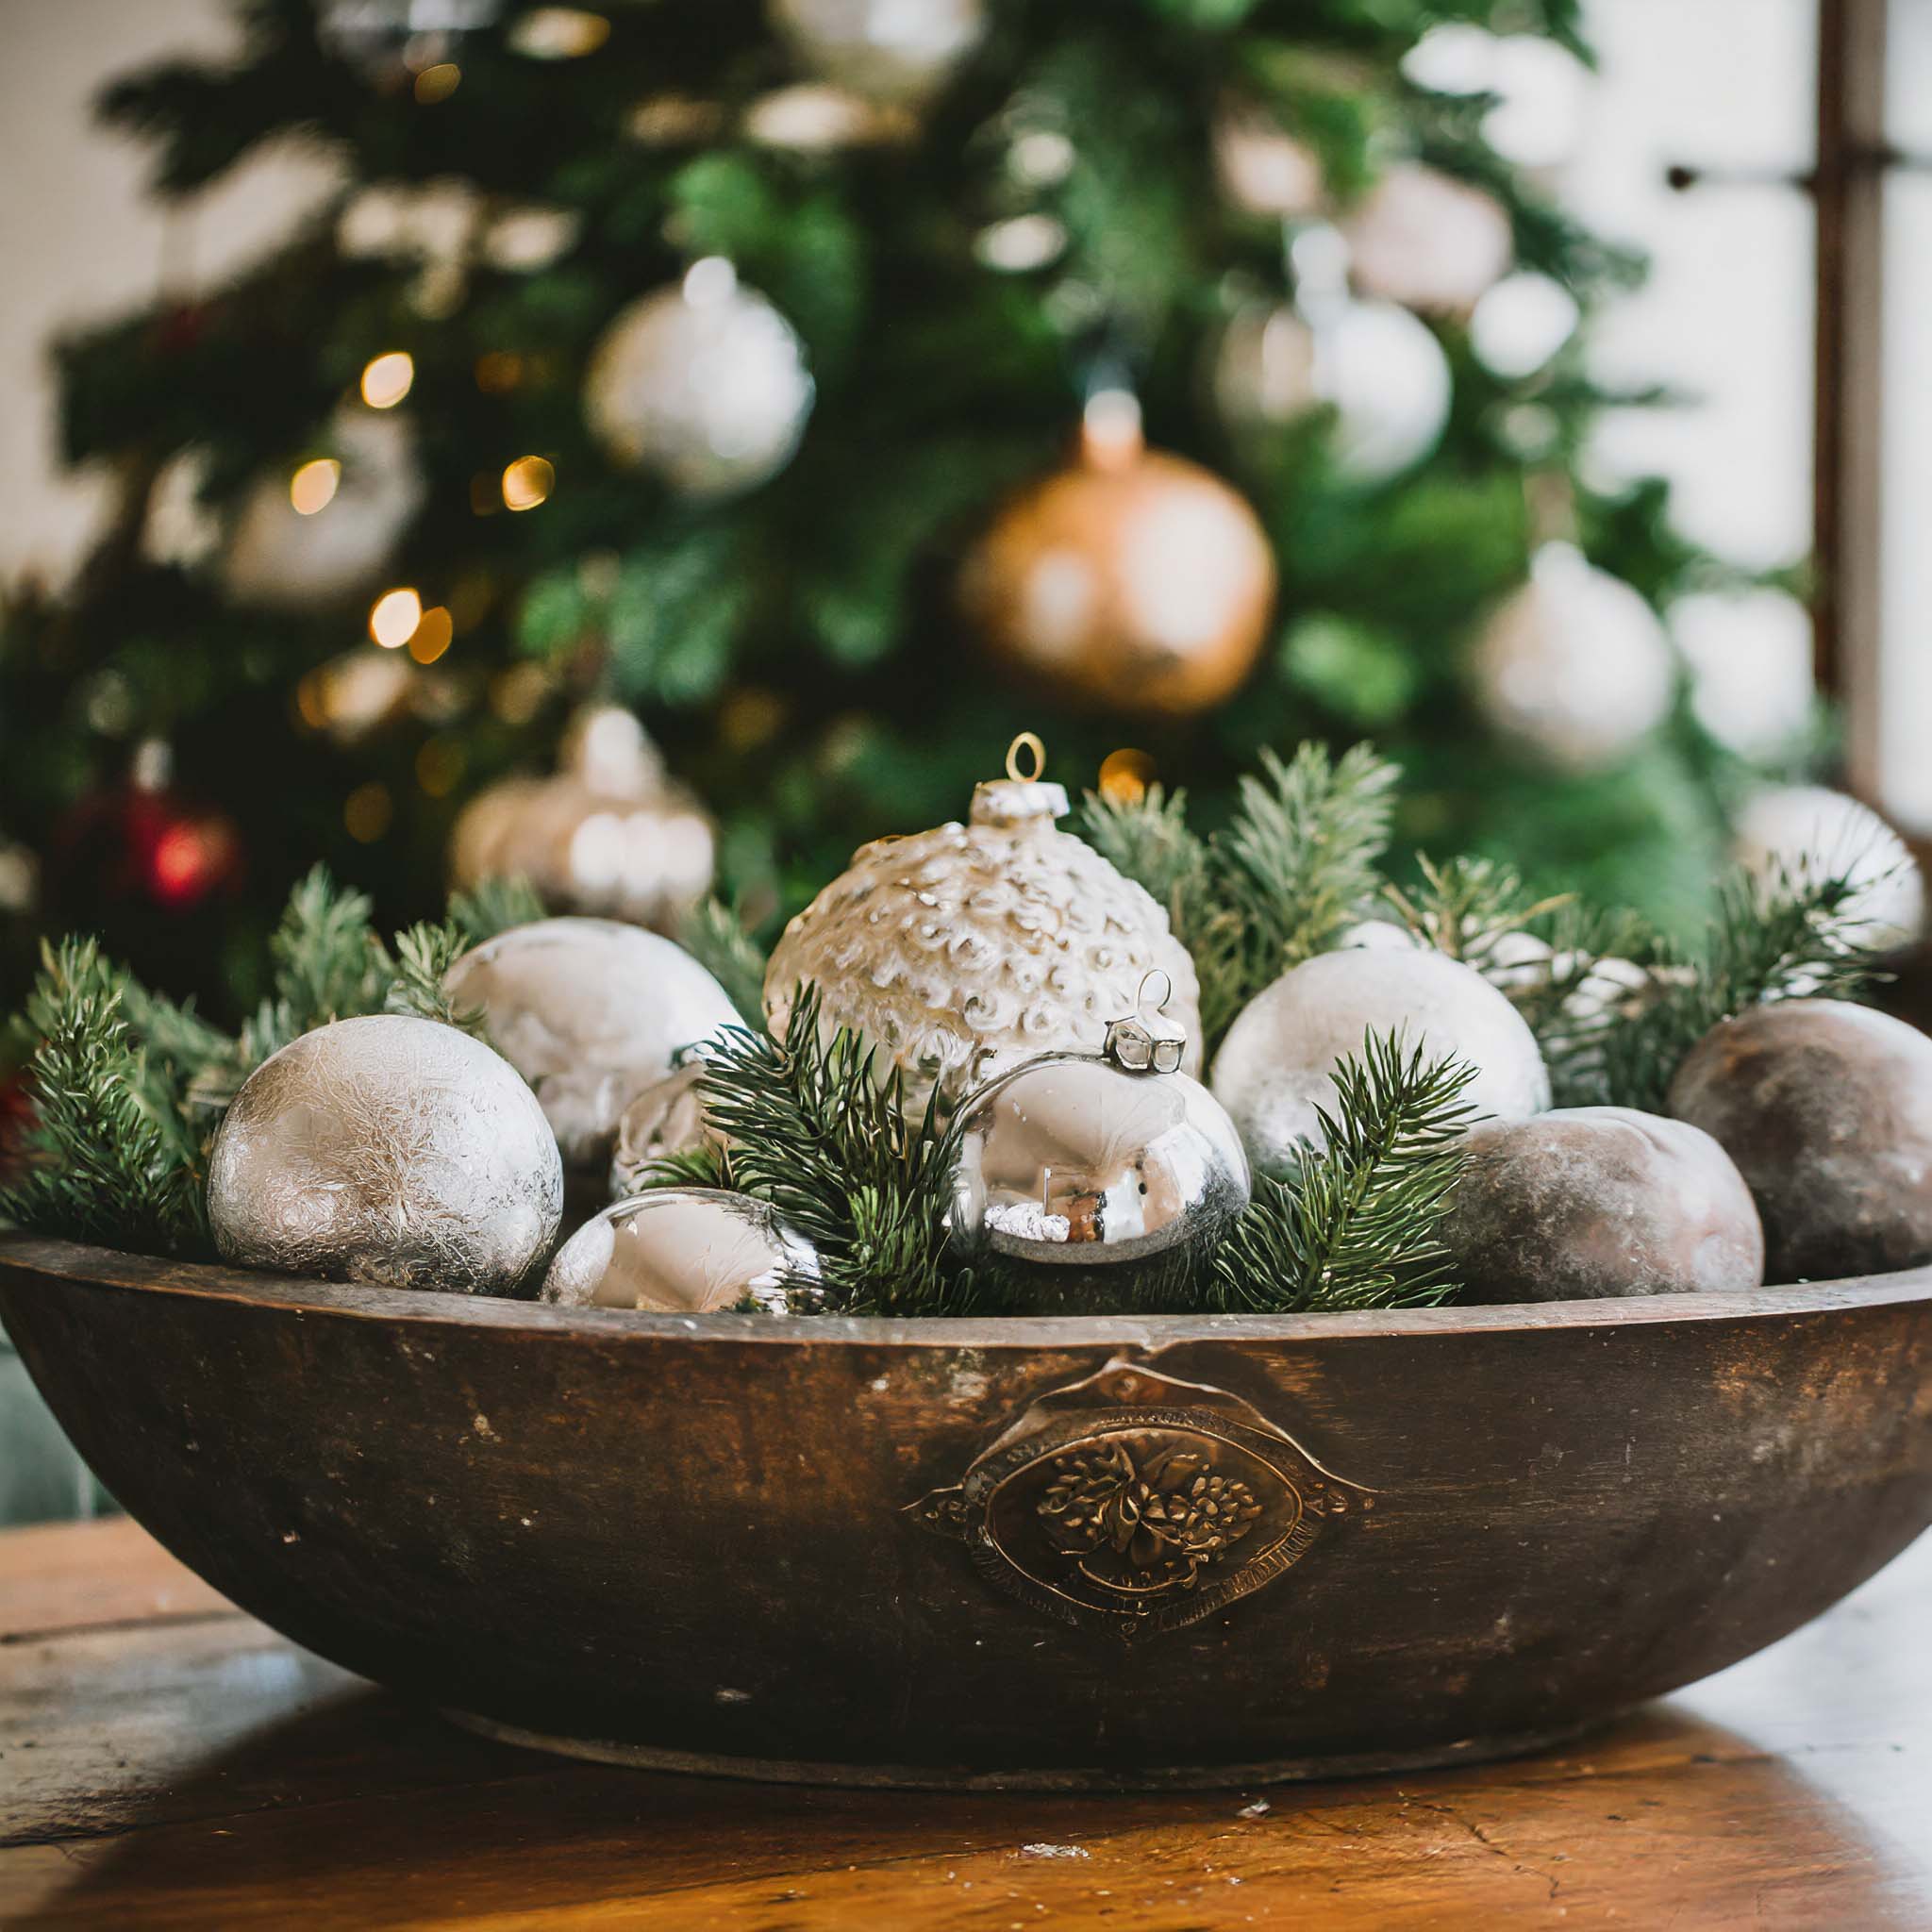 Wooden dough bowl filled with vintage holiday ornaments and greenery.